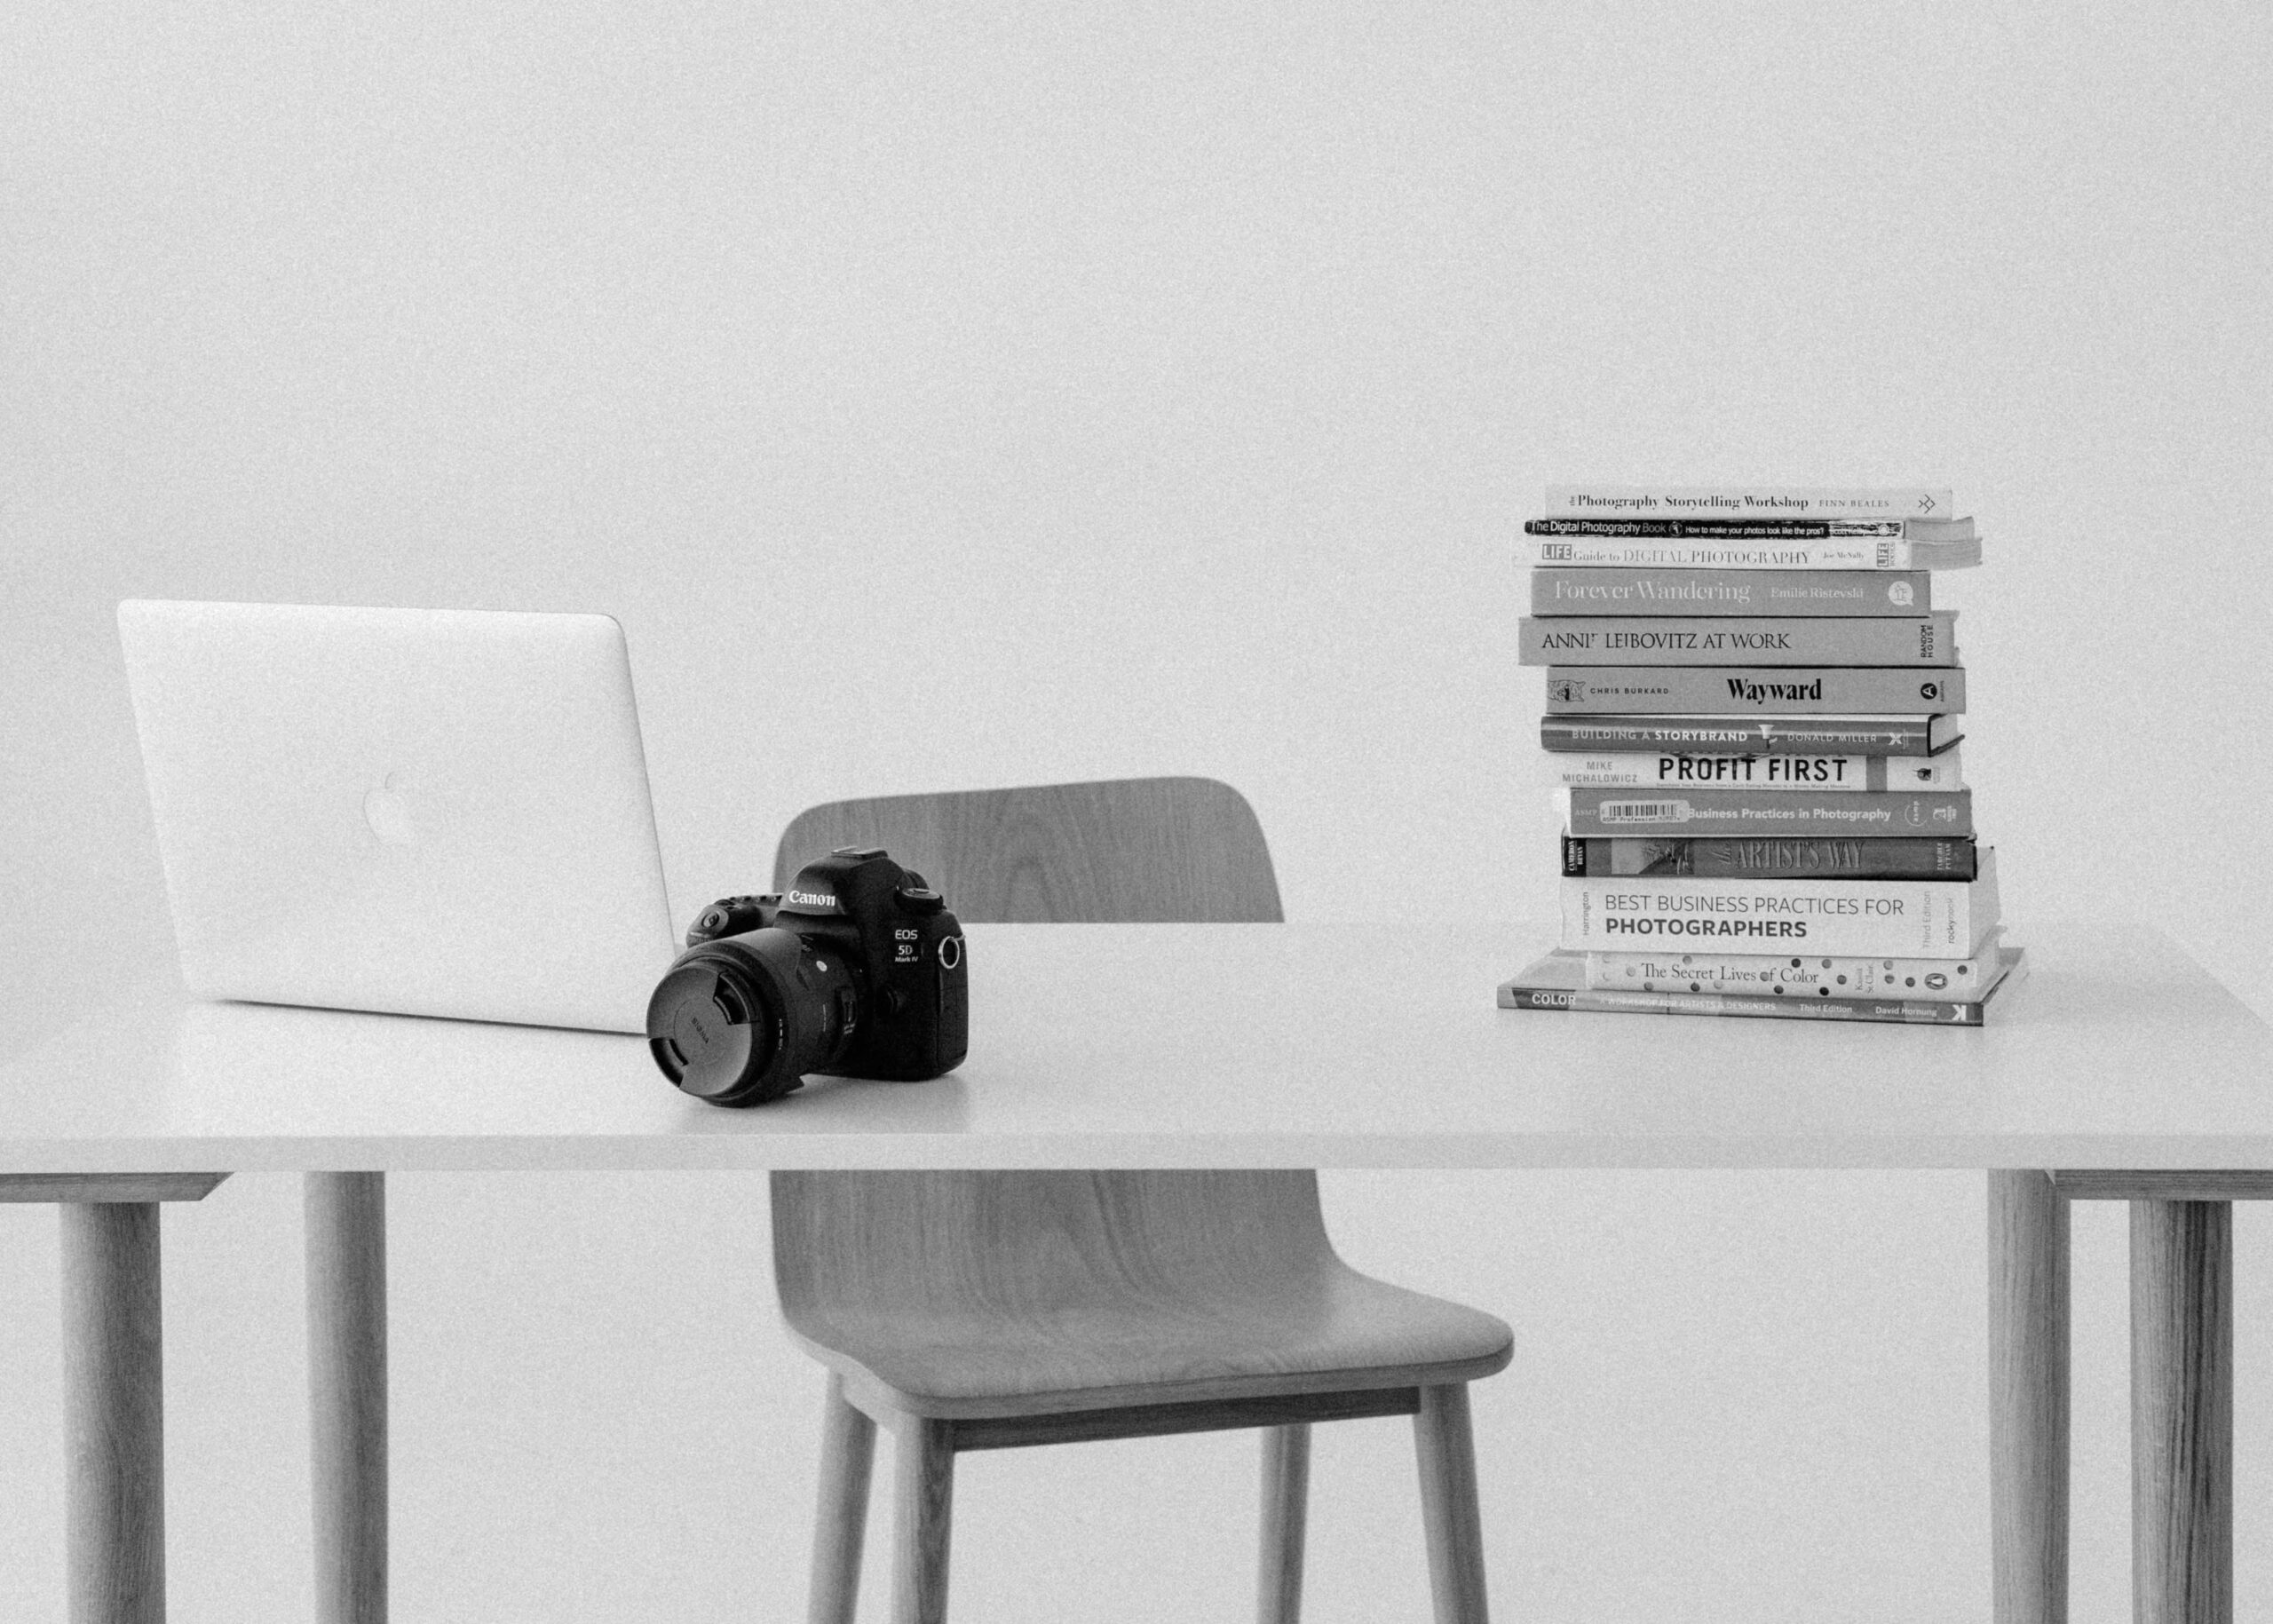 A laptop, camera, and books are styled on top of a desk.